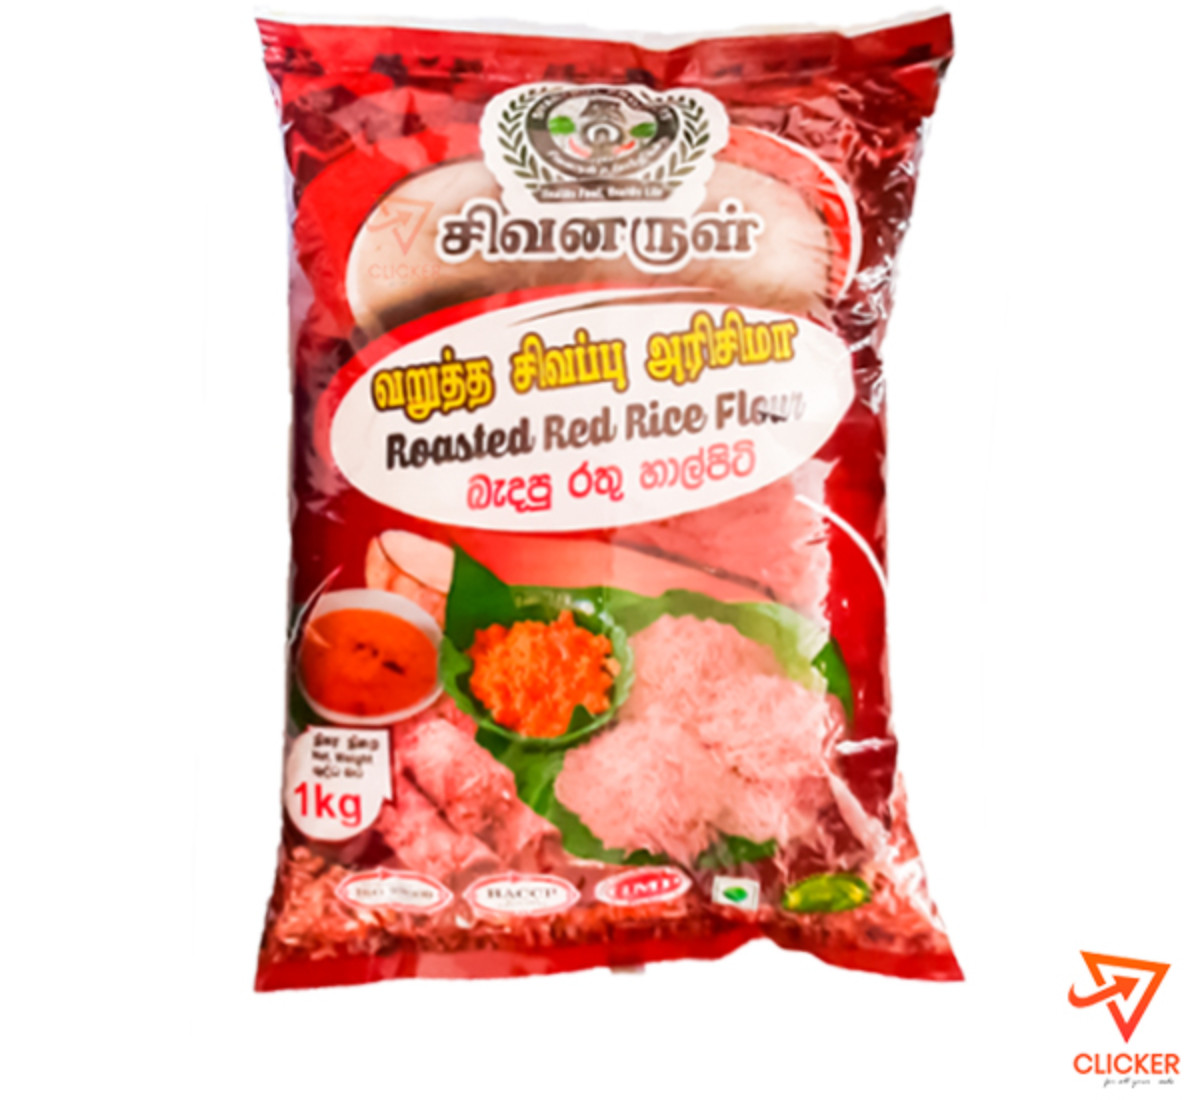 Clicker product 1kg SIVANARUL ROASTED RED RICE FLOUR 1131